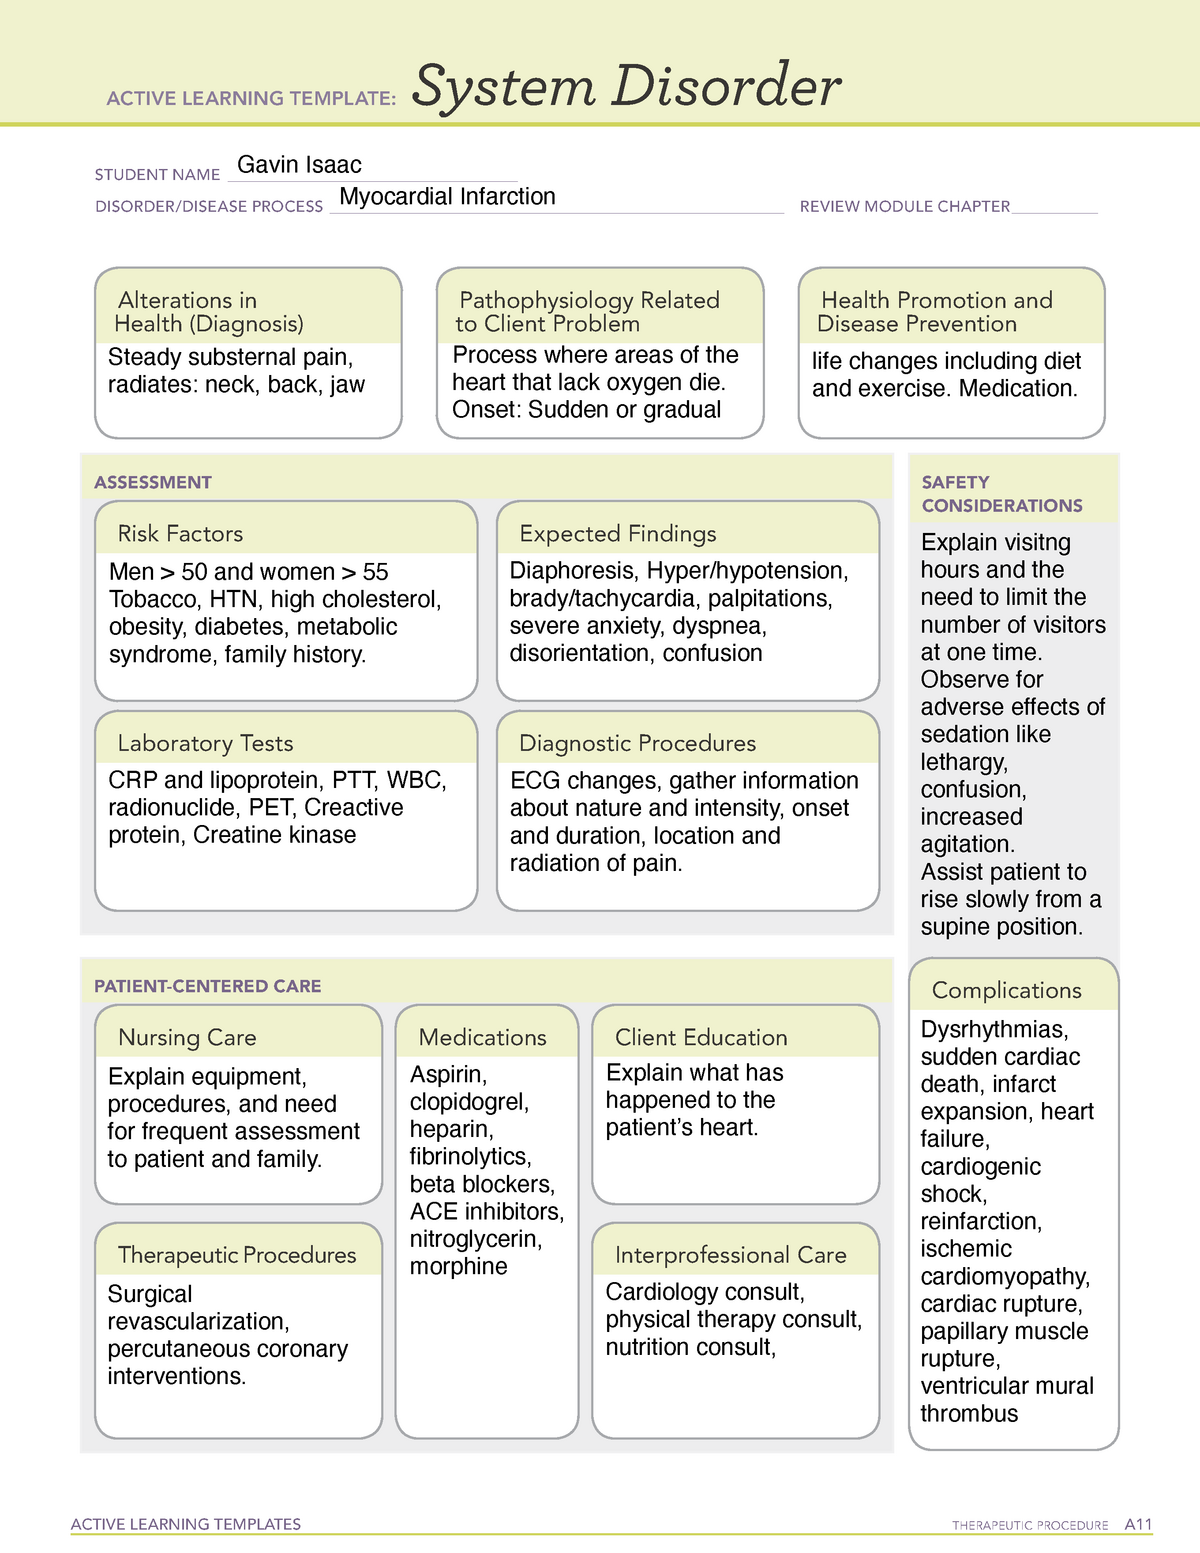 Disorder MI Active Learning Template ACTIVE LEARNING TEMPLATES